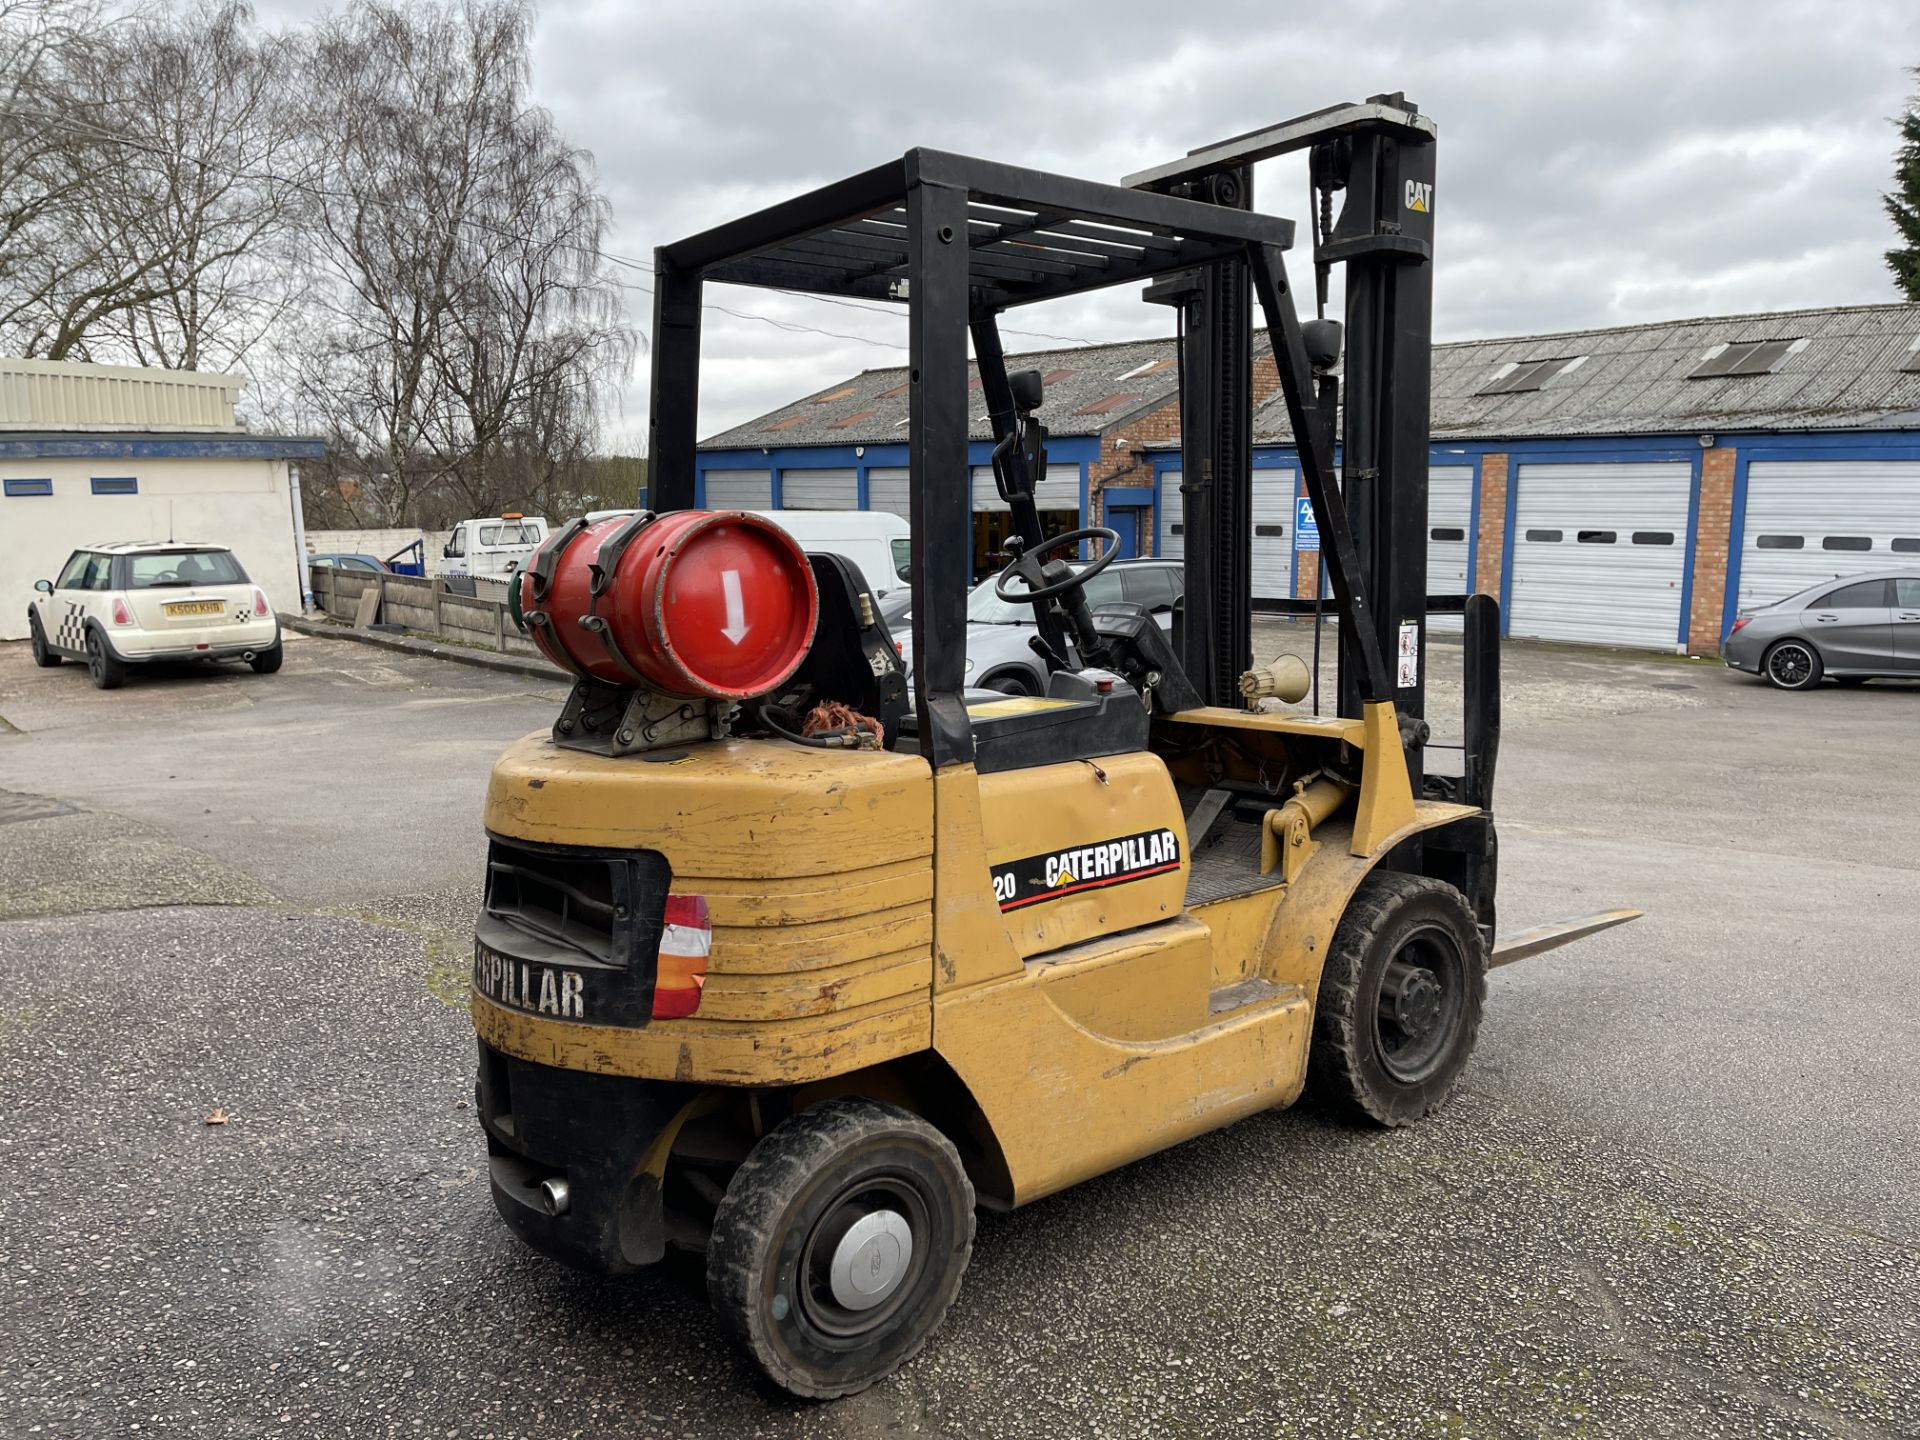 Caterpillar 20, LPG Fork Lift Truck, Serial No. 5AN10210, Rated Capacity 2,000 Kg (1996) - Image 8 of 17